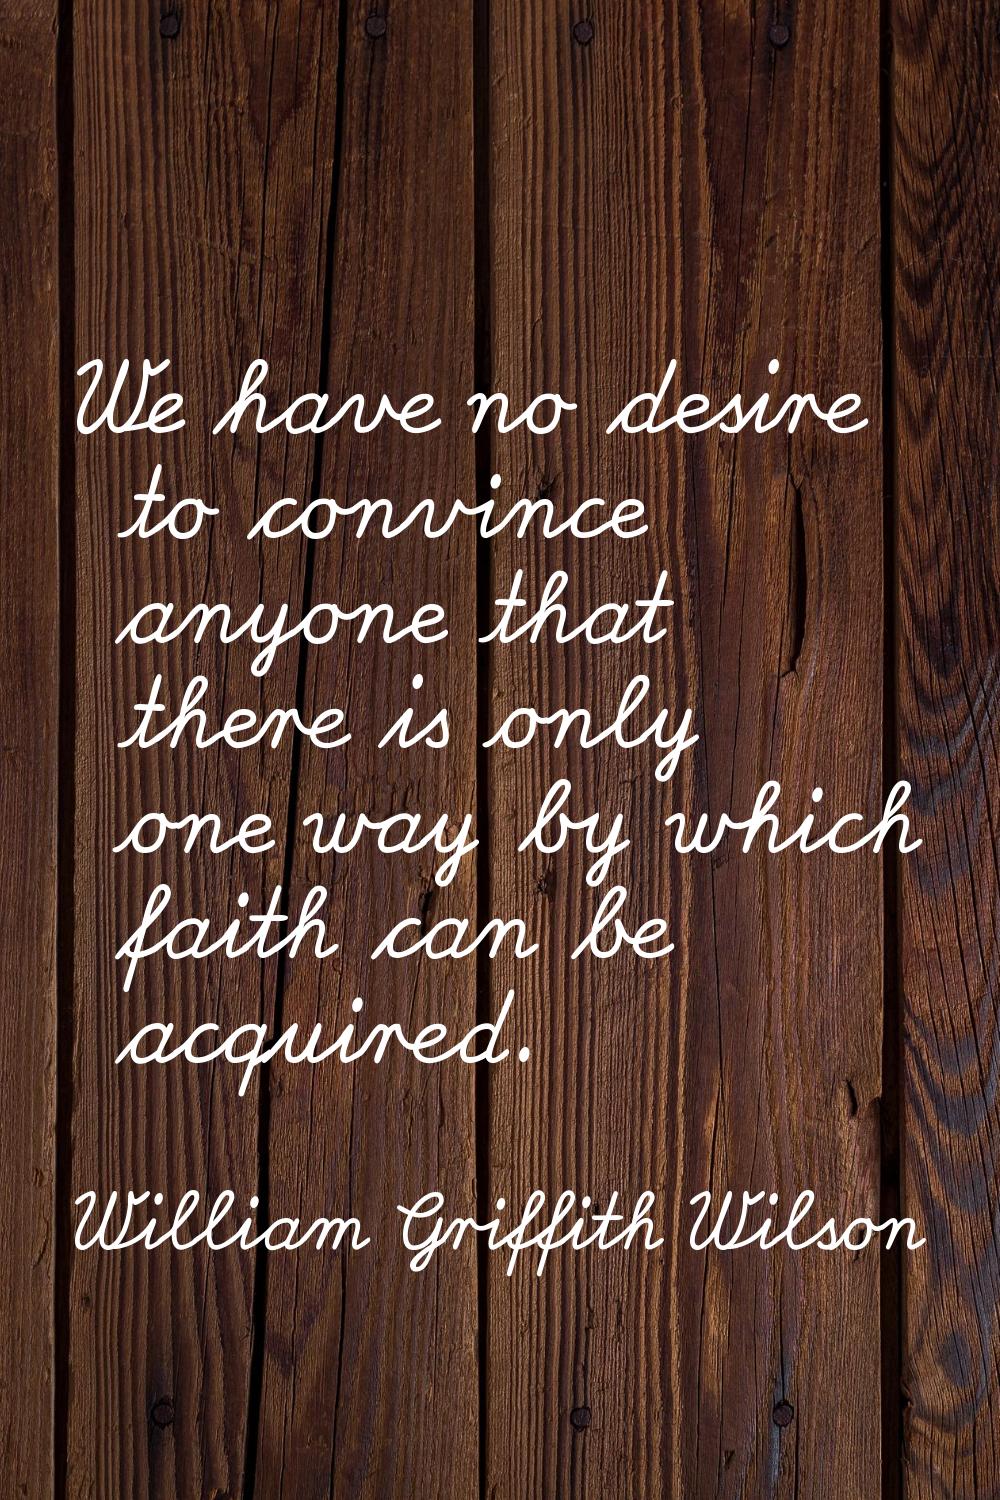 We have no desire to convince anyone that there is only one way by which faith can be acquired.